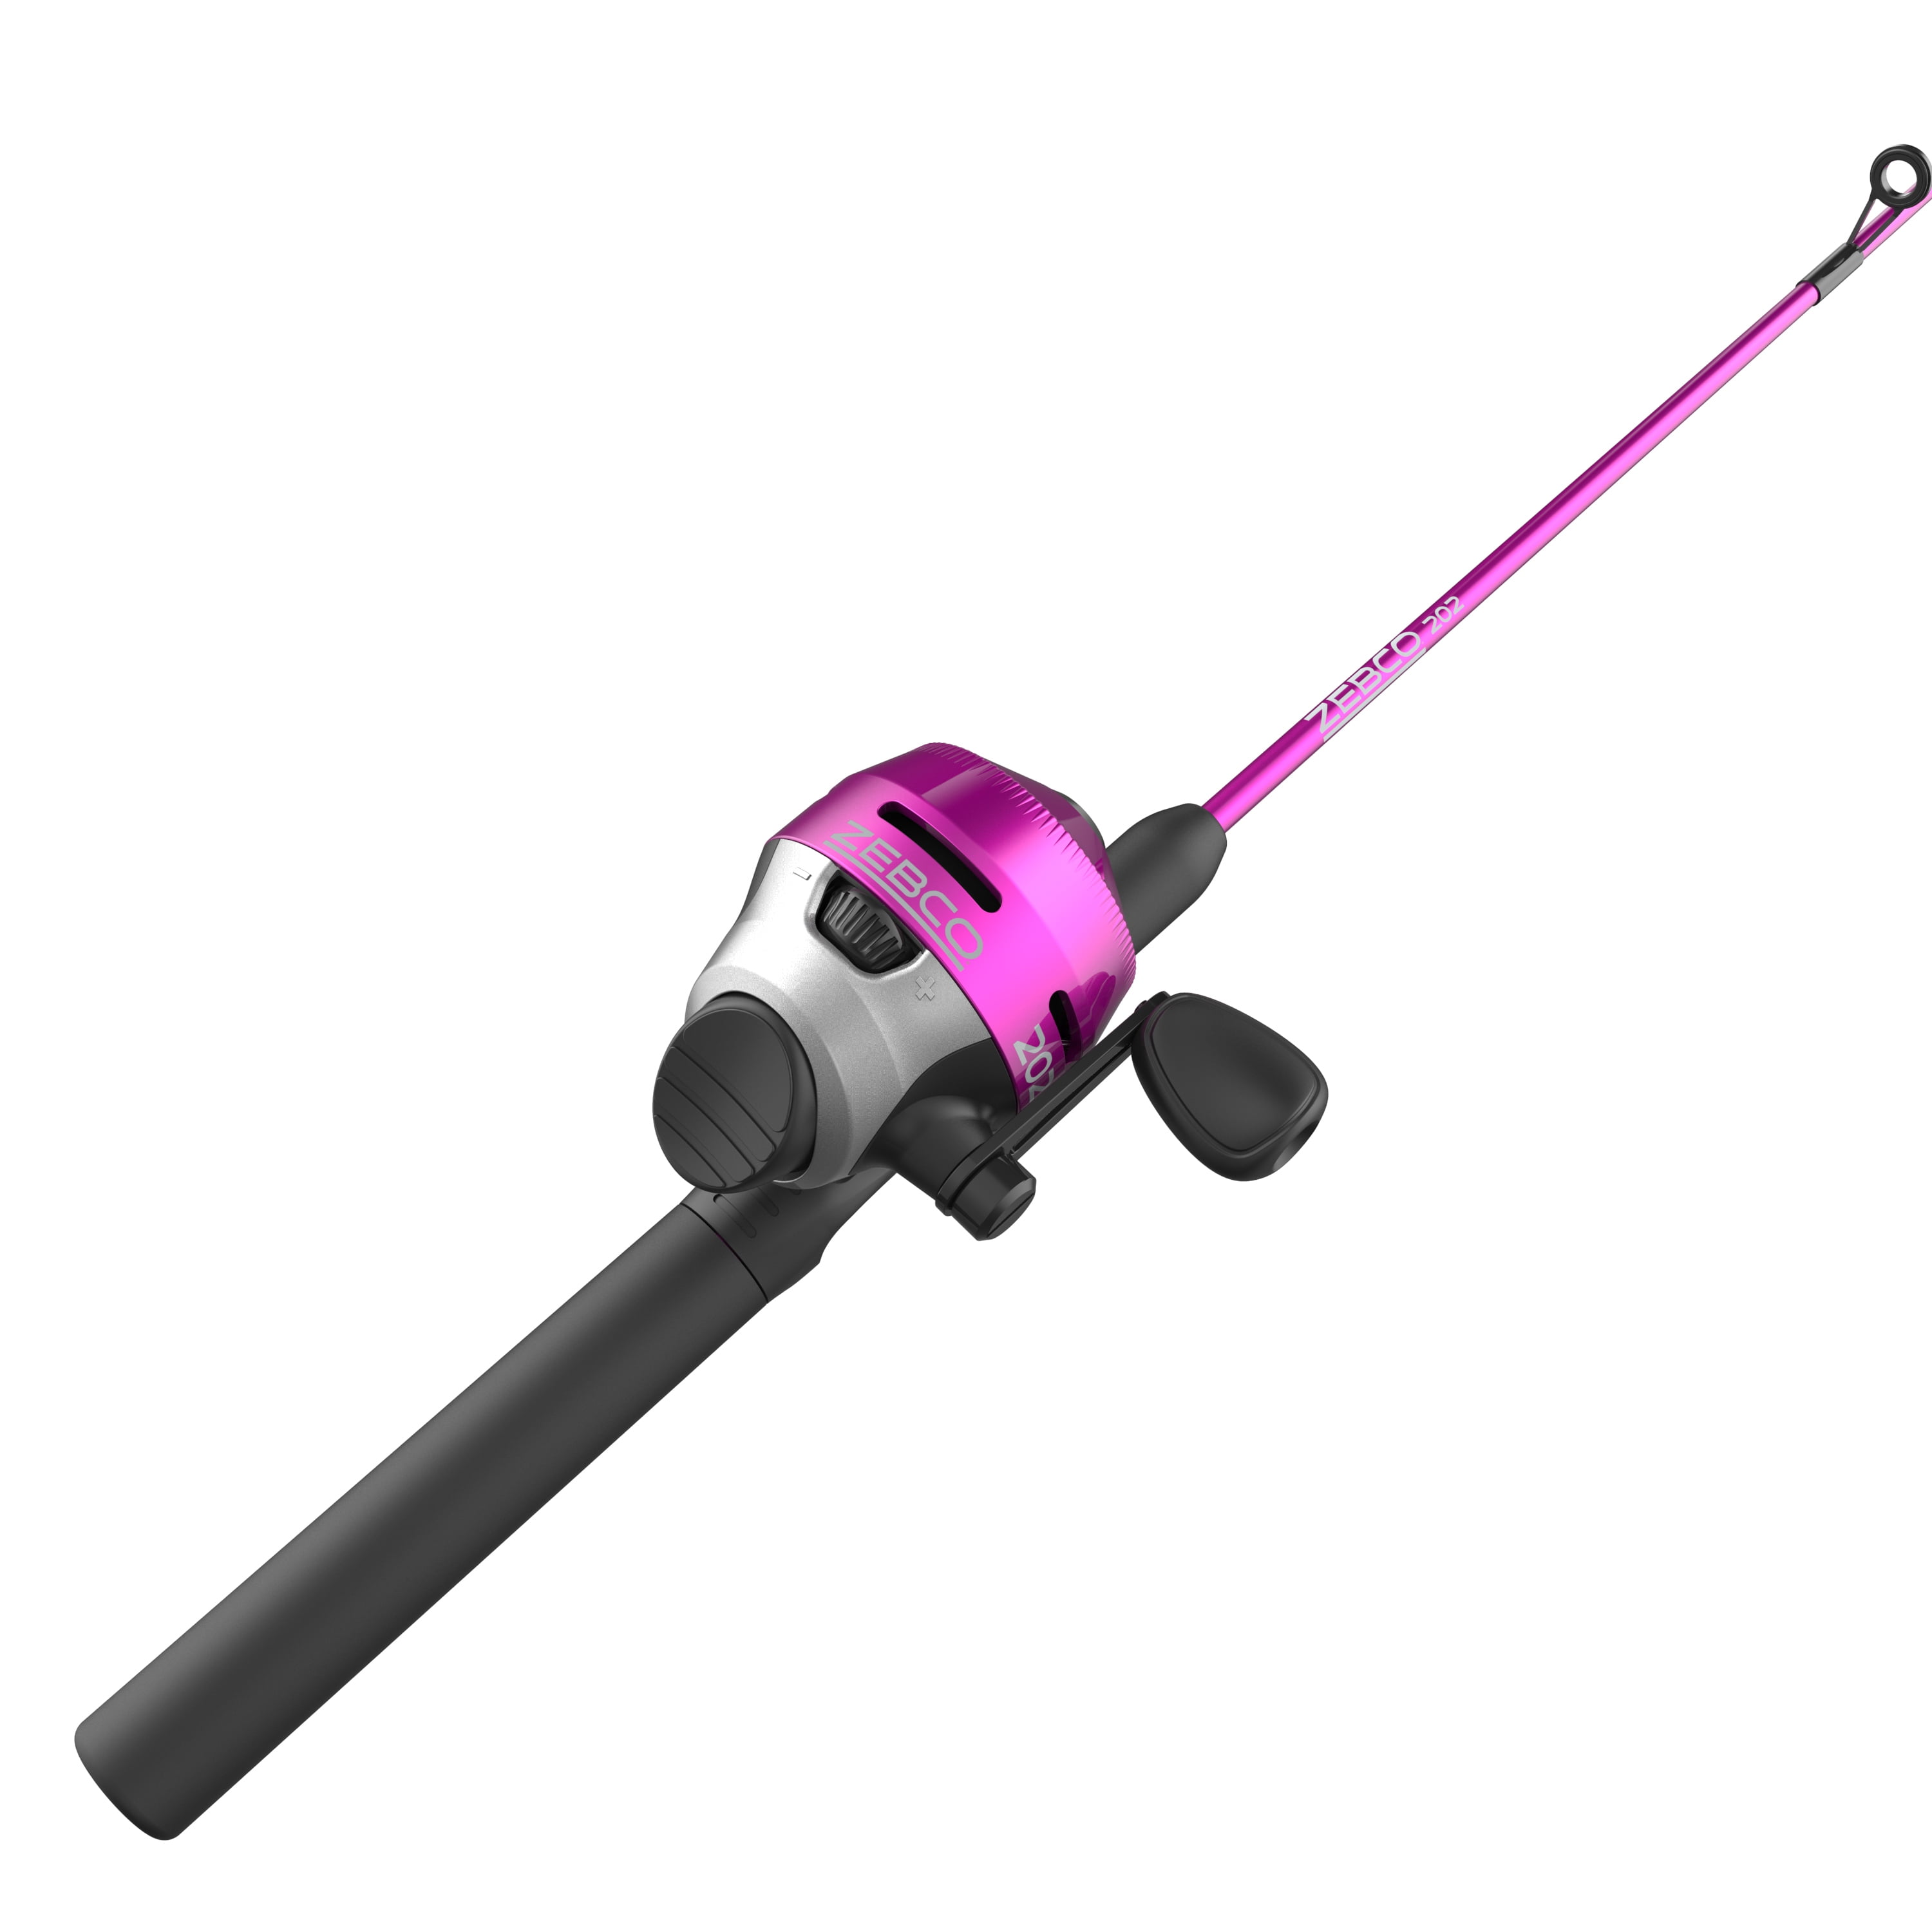 Zebco 202 Spincast Reel and Fishing Rod Combo, Tackle Included